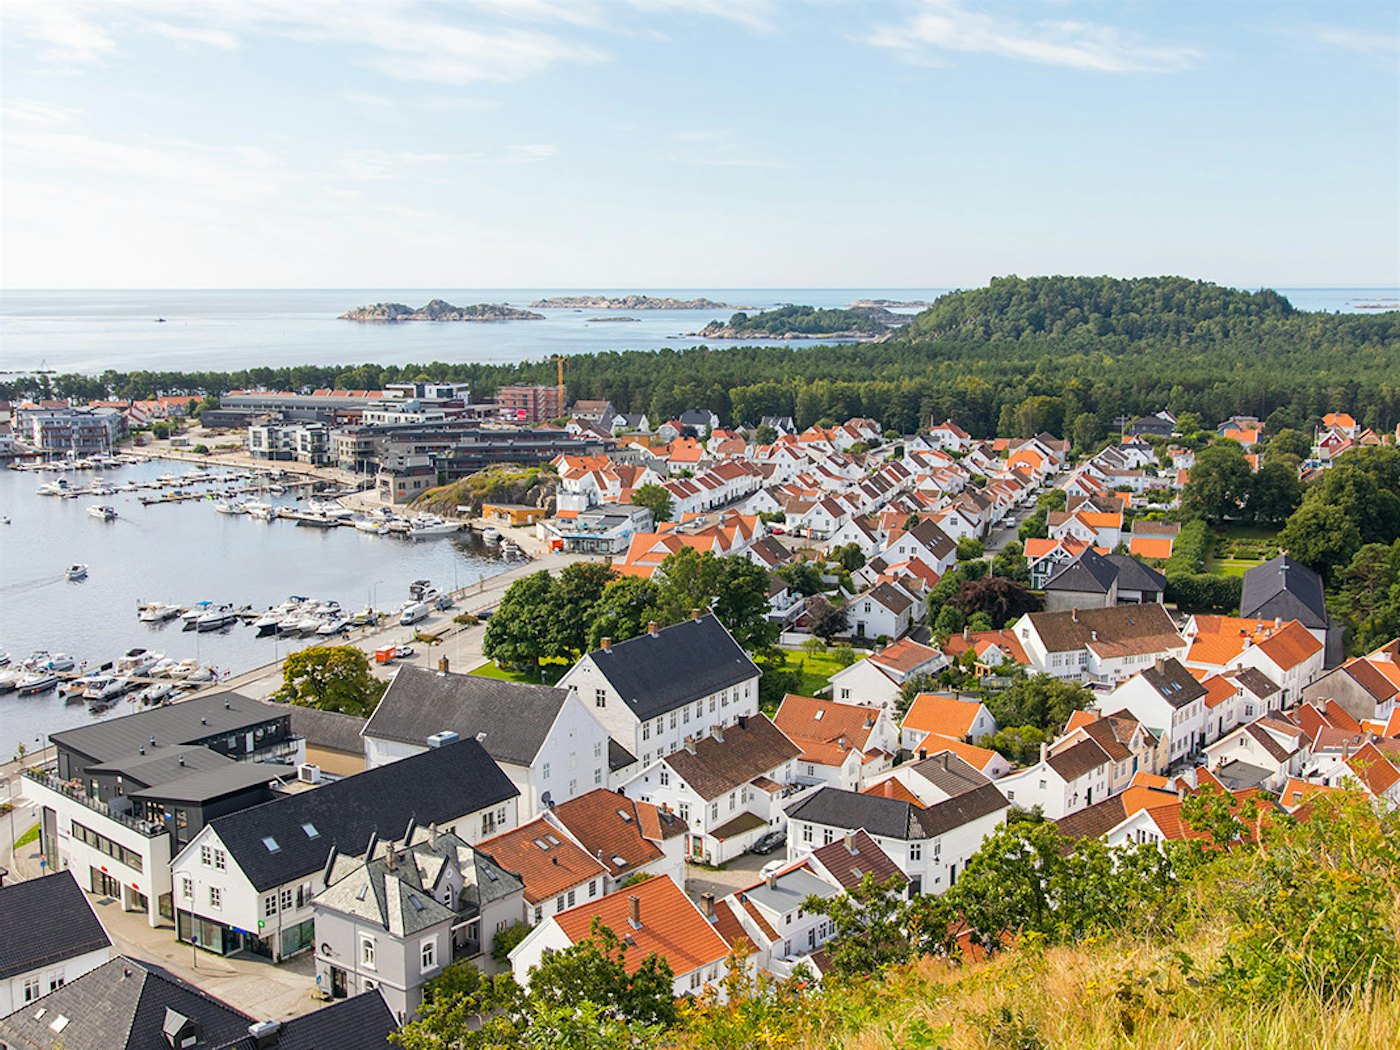 Overview of Mandal with many white wooden houses, the harbor and Furulunden. Photo